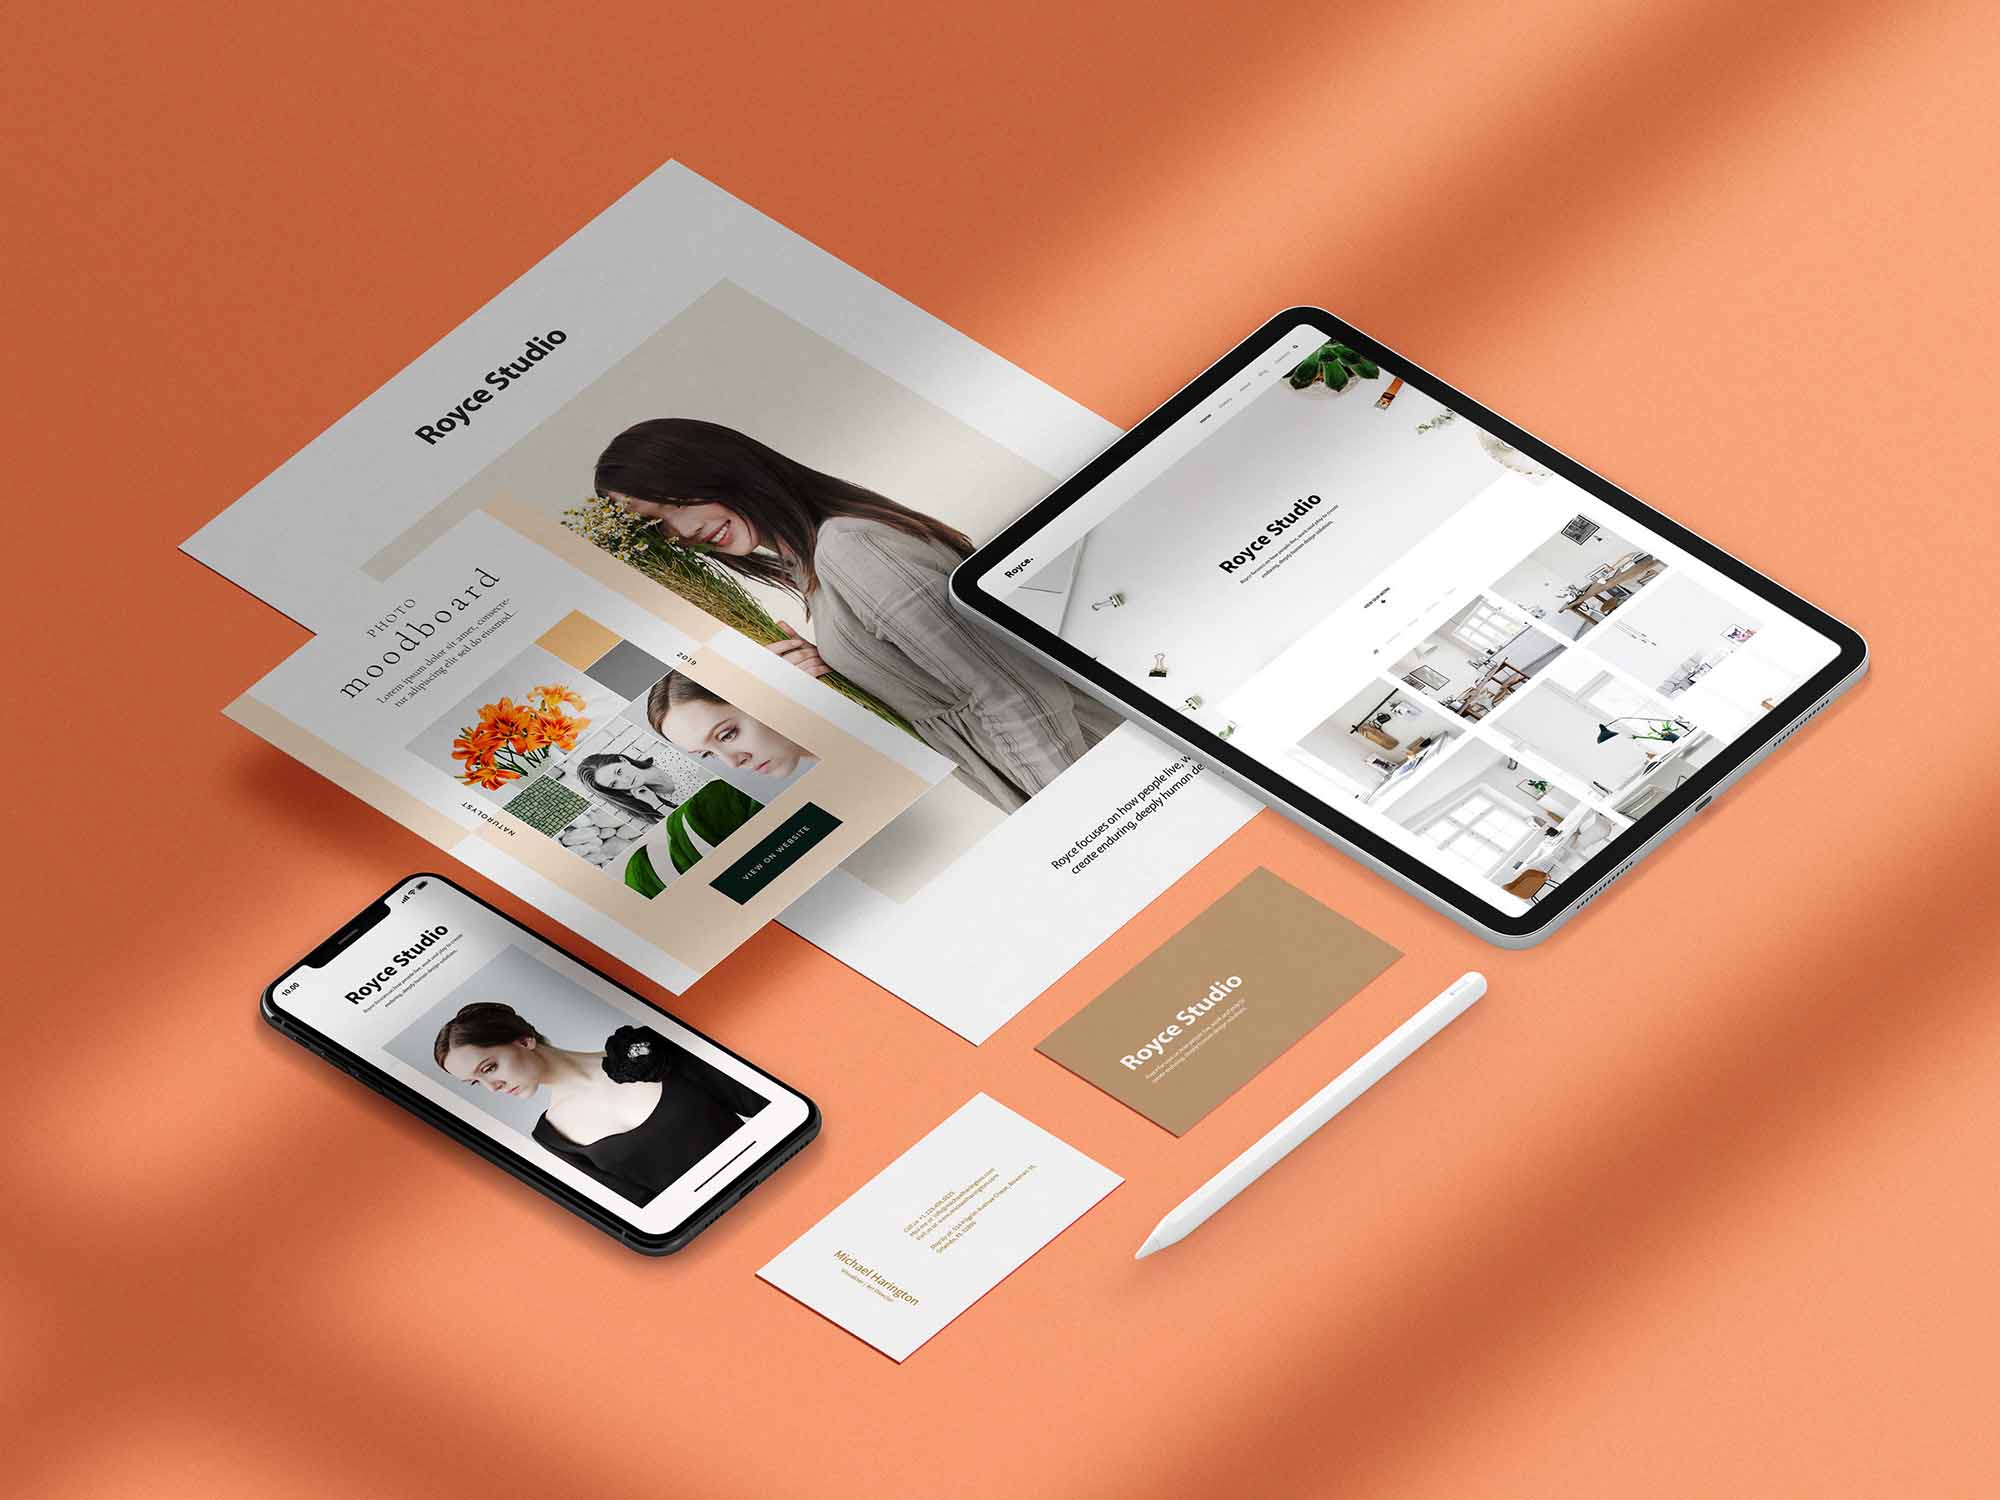 Download 35 Branding Mockups To Build A Strong Brand Decolore Net